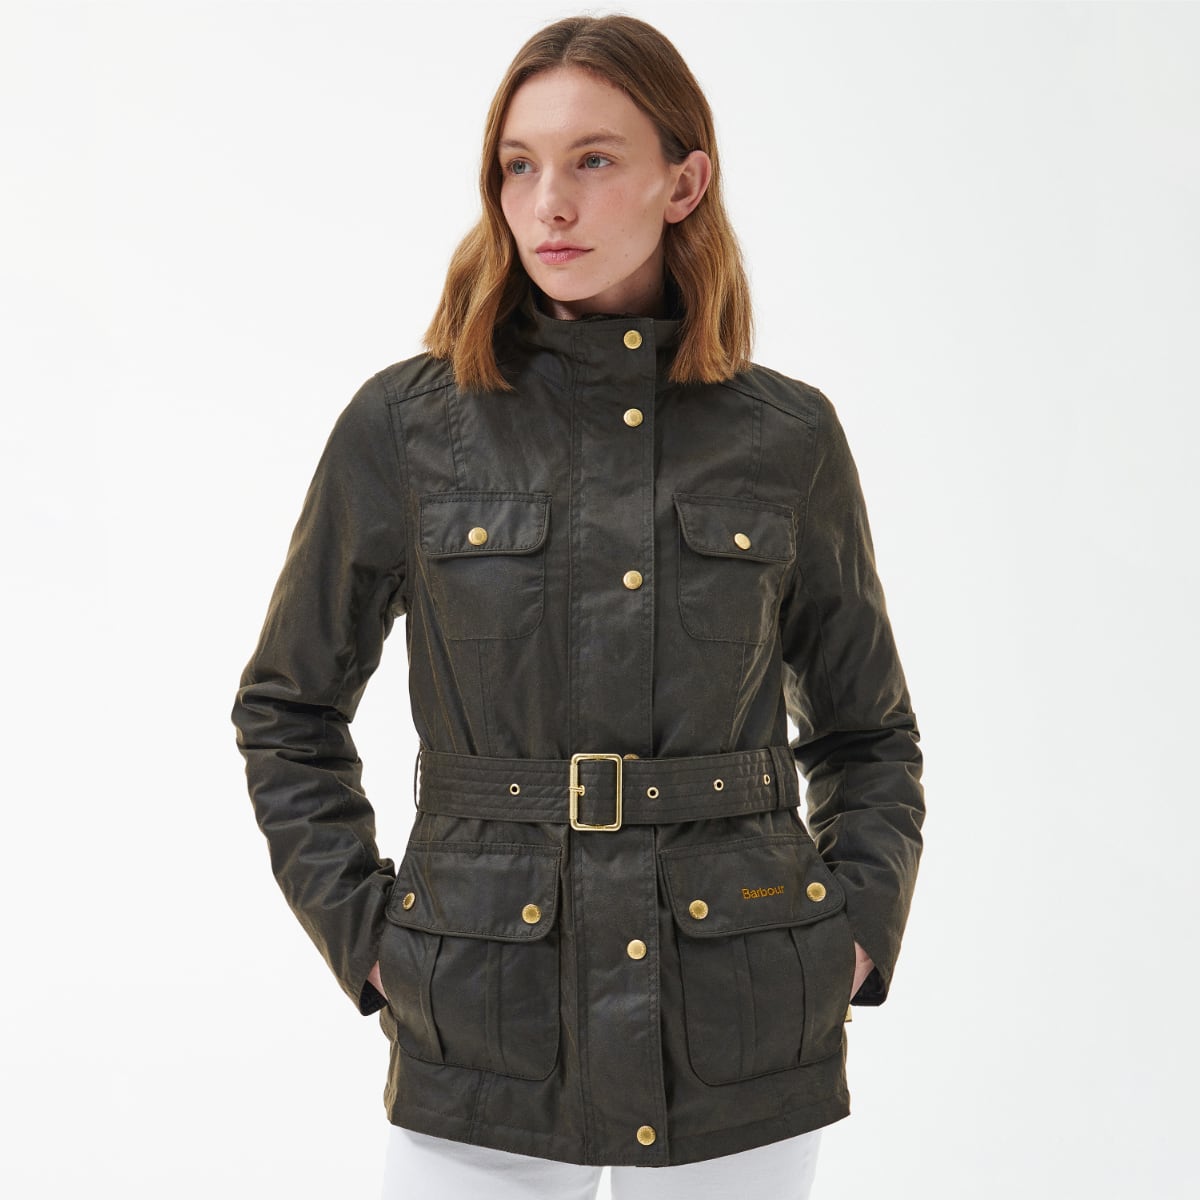 Barbour Winter Belted Utility Women's Waxed Jacket | Olive (Classic Tartan lining)